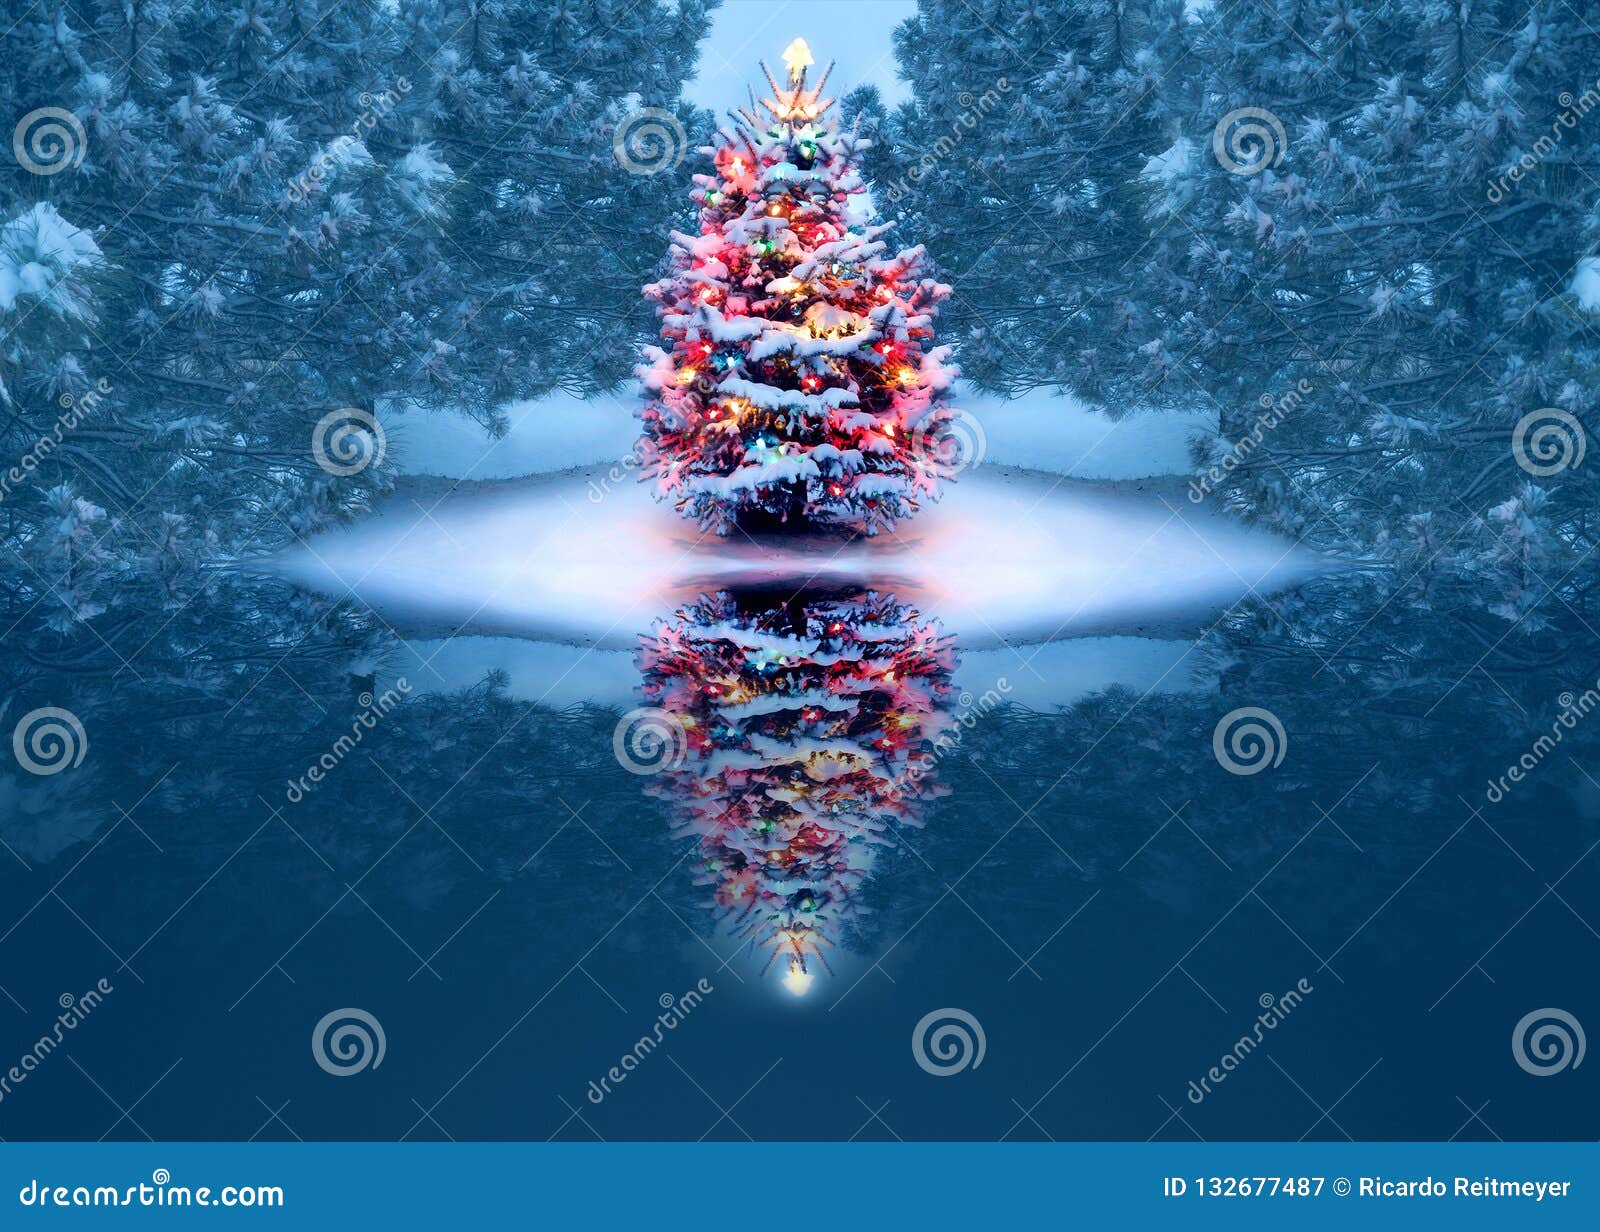 beautifully decorated christmas tree reflects magically in frozen lake